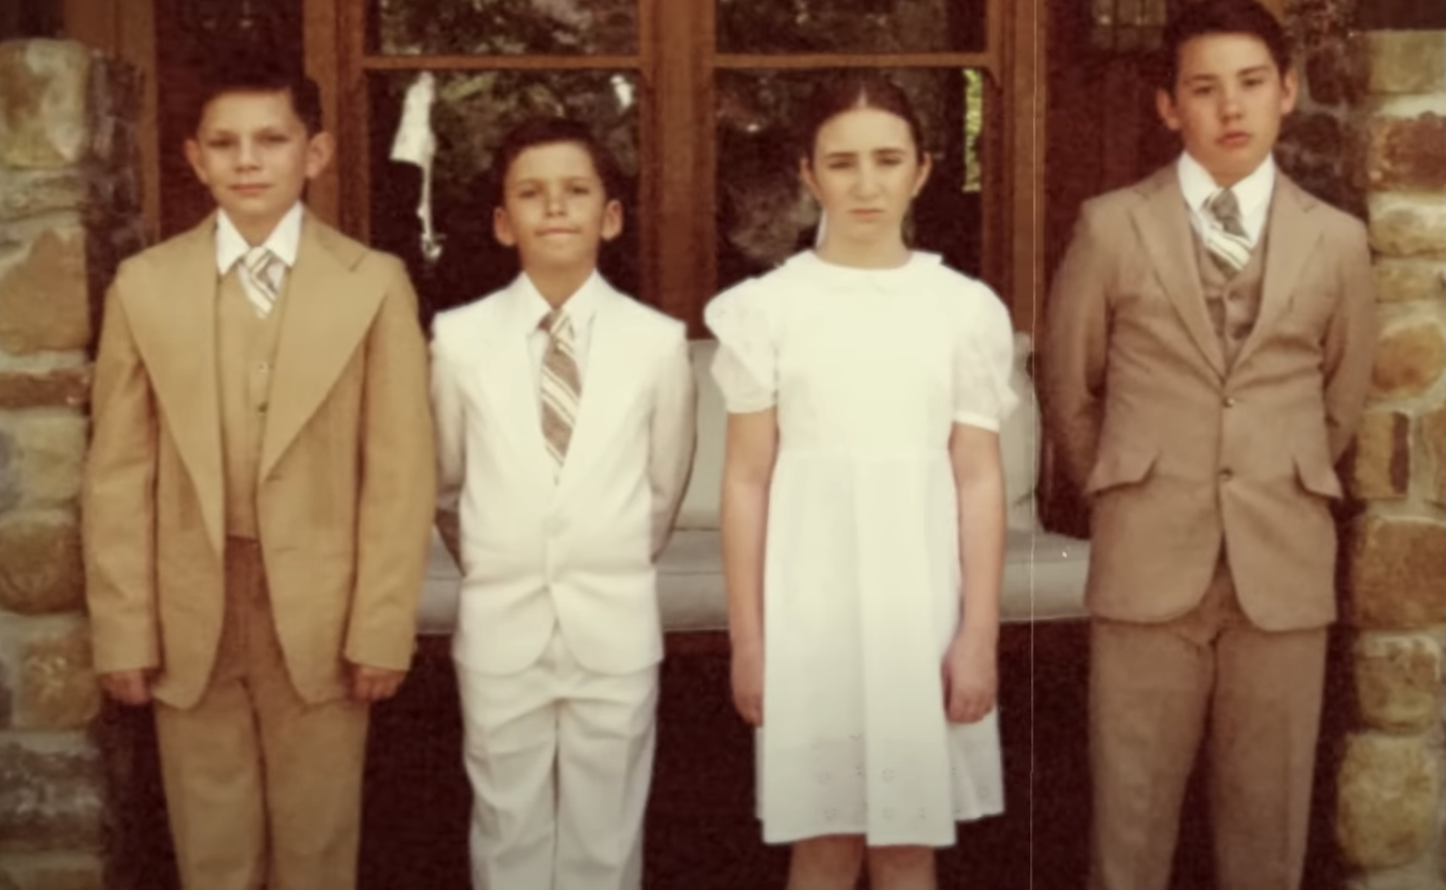 Kids standing in a row wearing dressy clothes